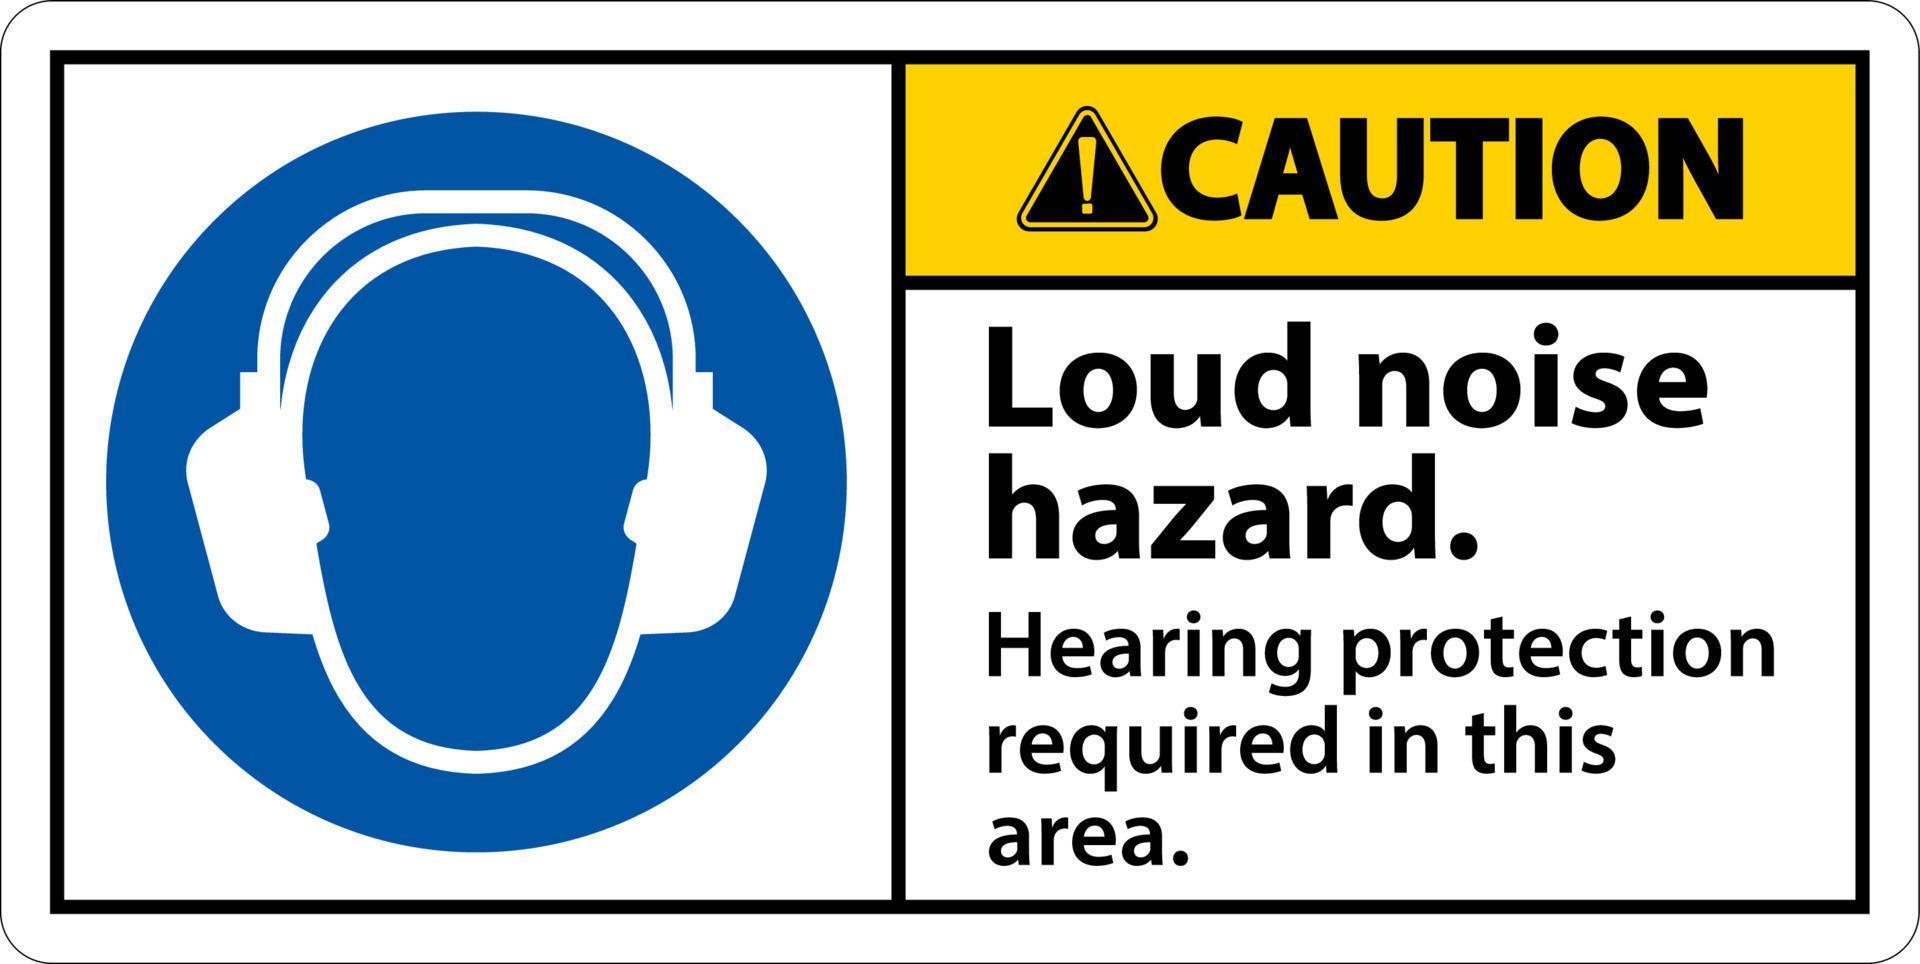 Caution Hearing Protection Required Sign On White Background vector